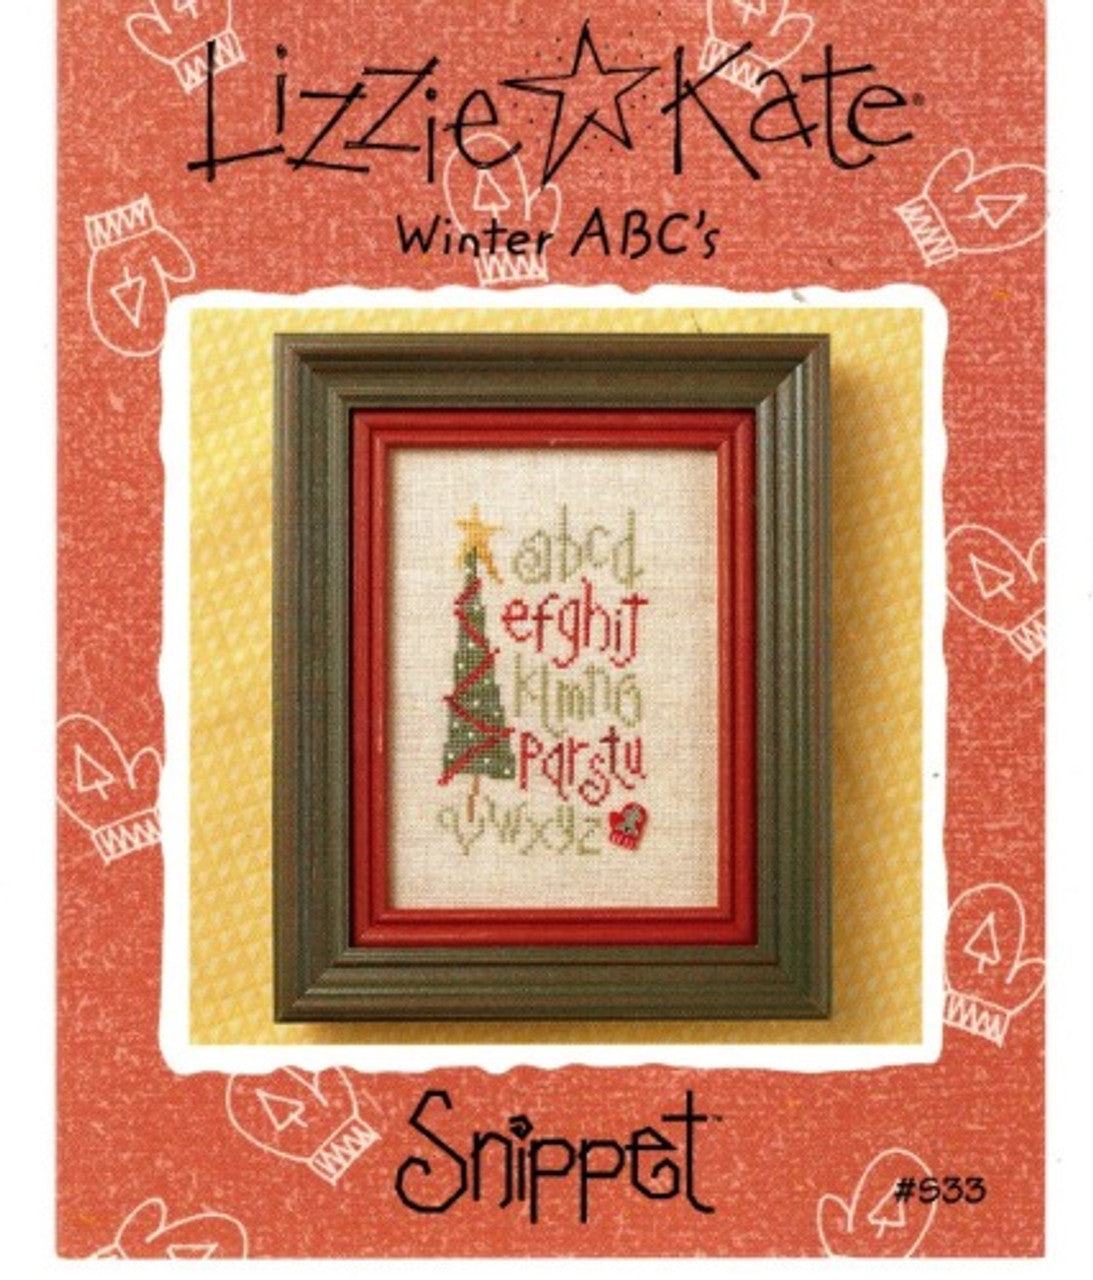 Snippet: Winter ABC’s by Lizzie Kate S33